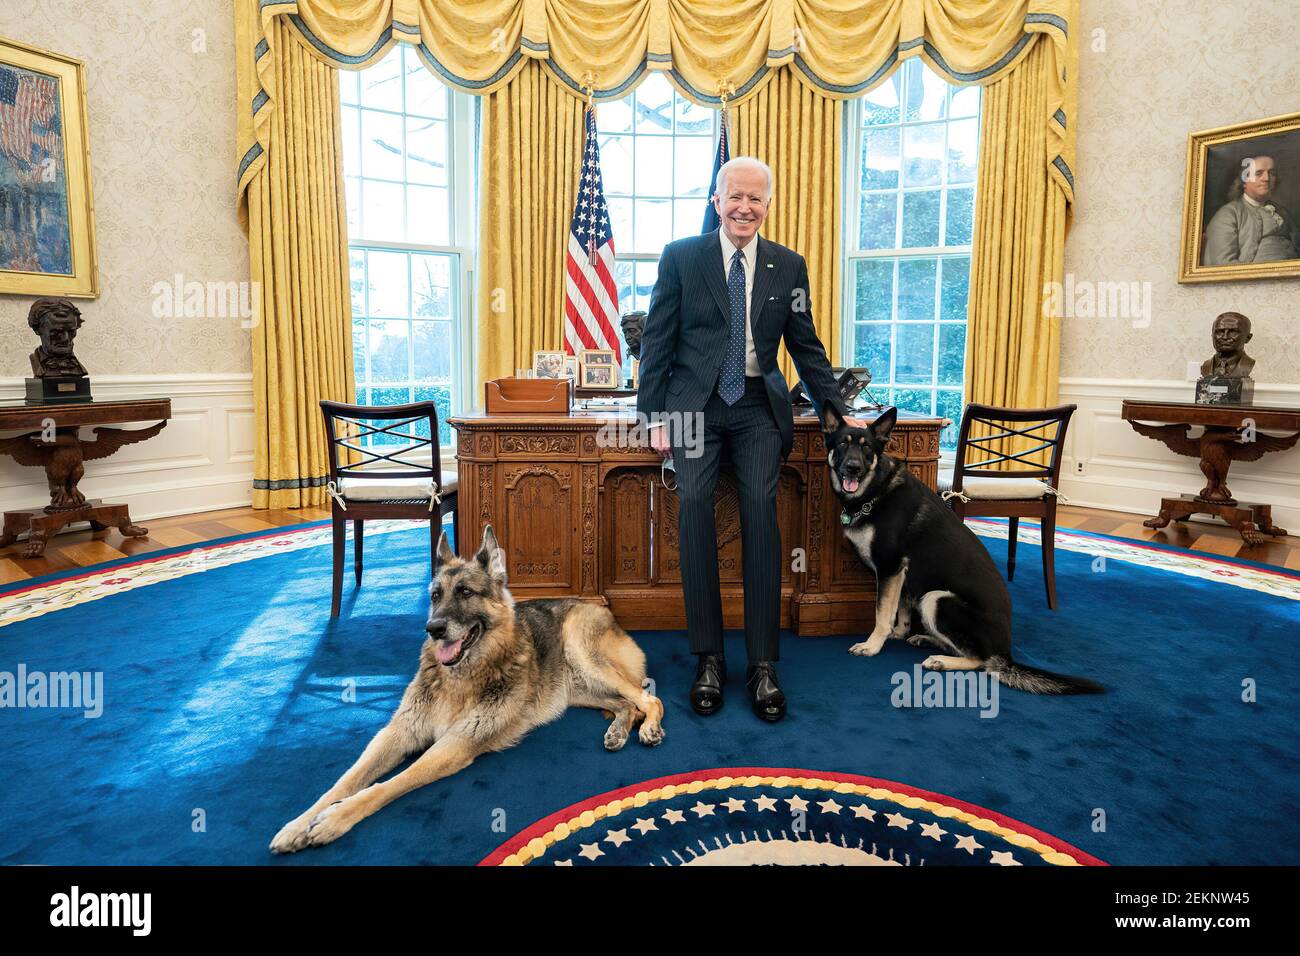 President Joe Biden poses with the Biden family dogs Champ and Major Tuesday, Feb. 9, 2021, in the Oval Office of the White House. (Official White House Photo by Adam Schultz) Stock Photo